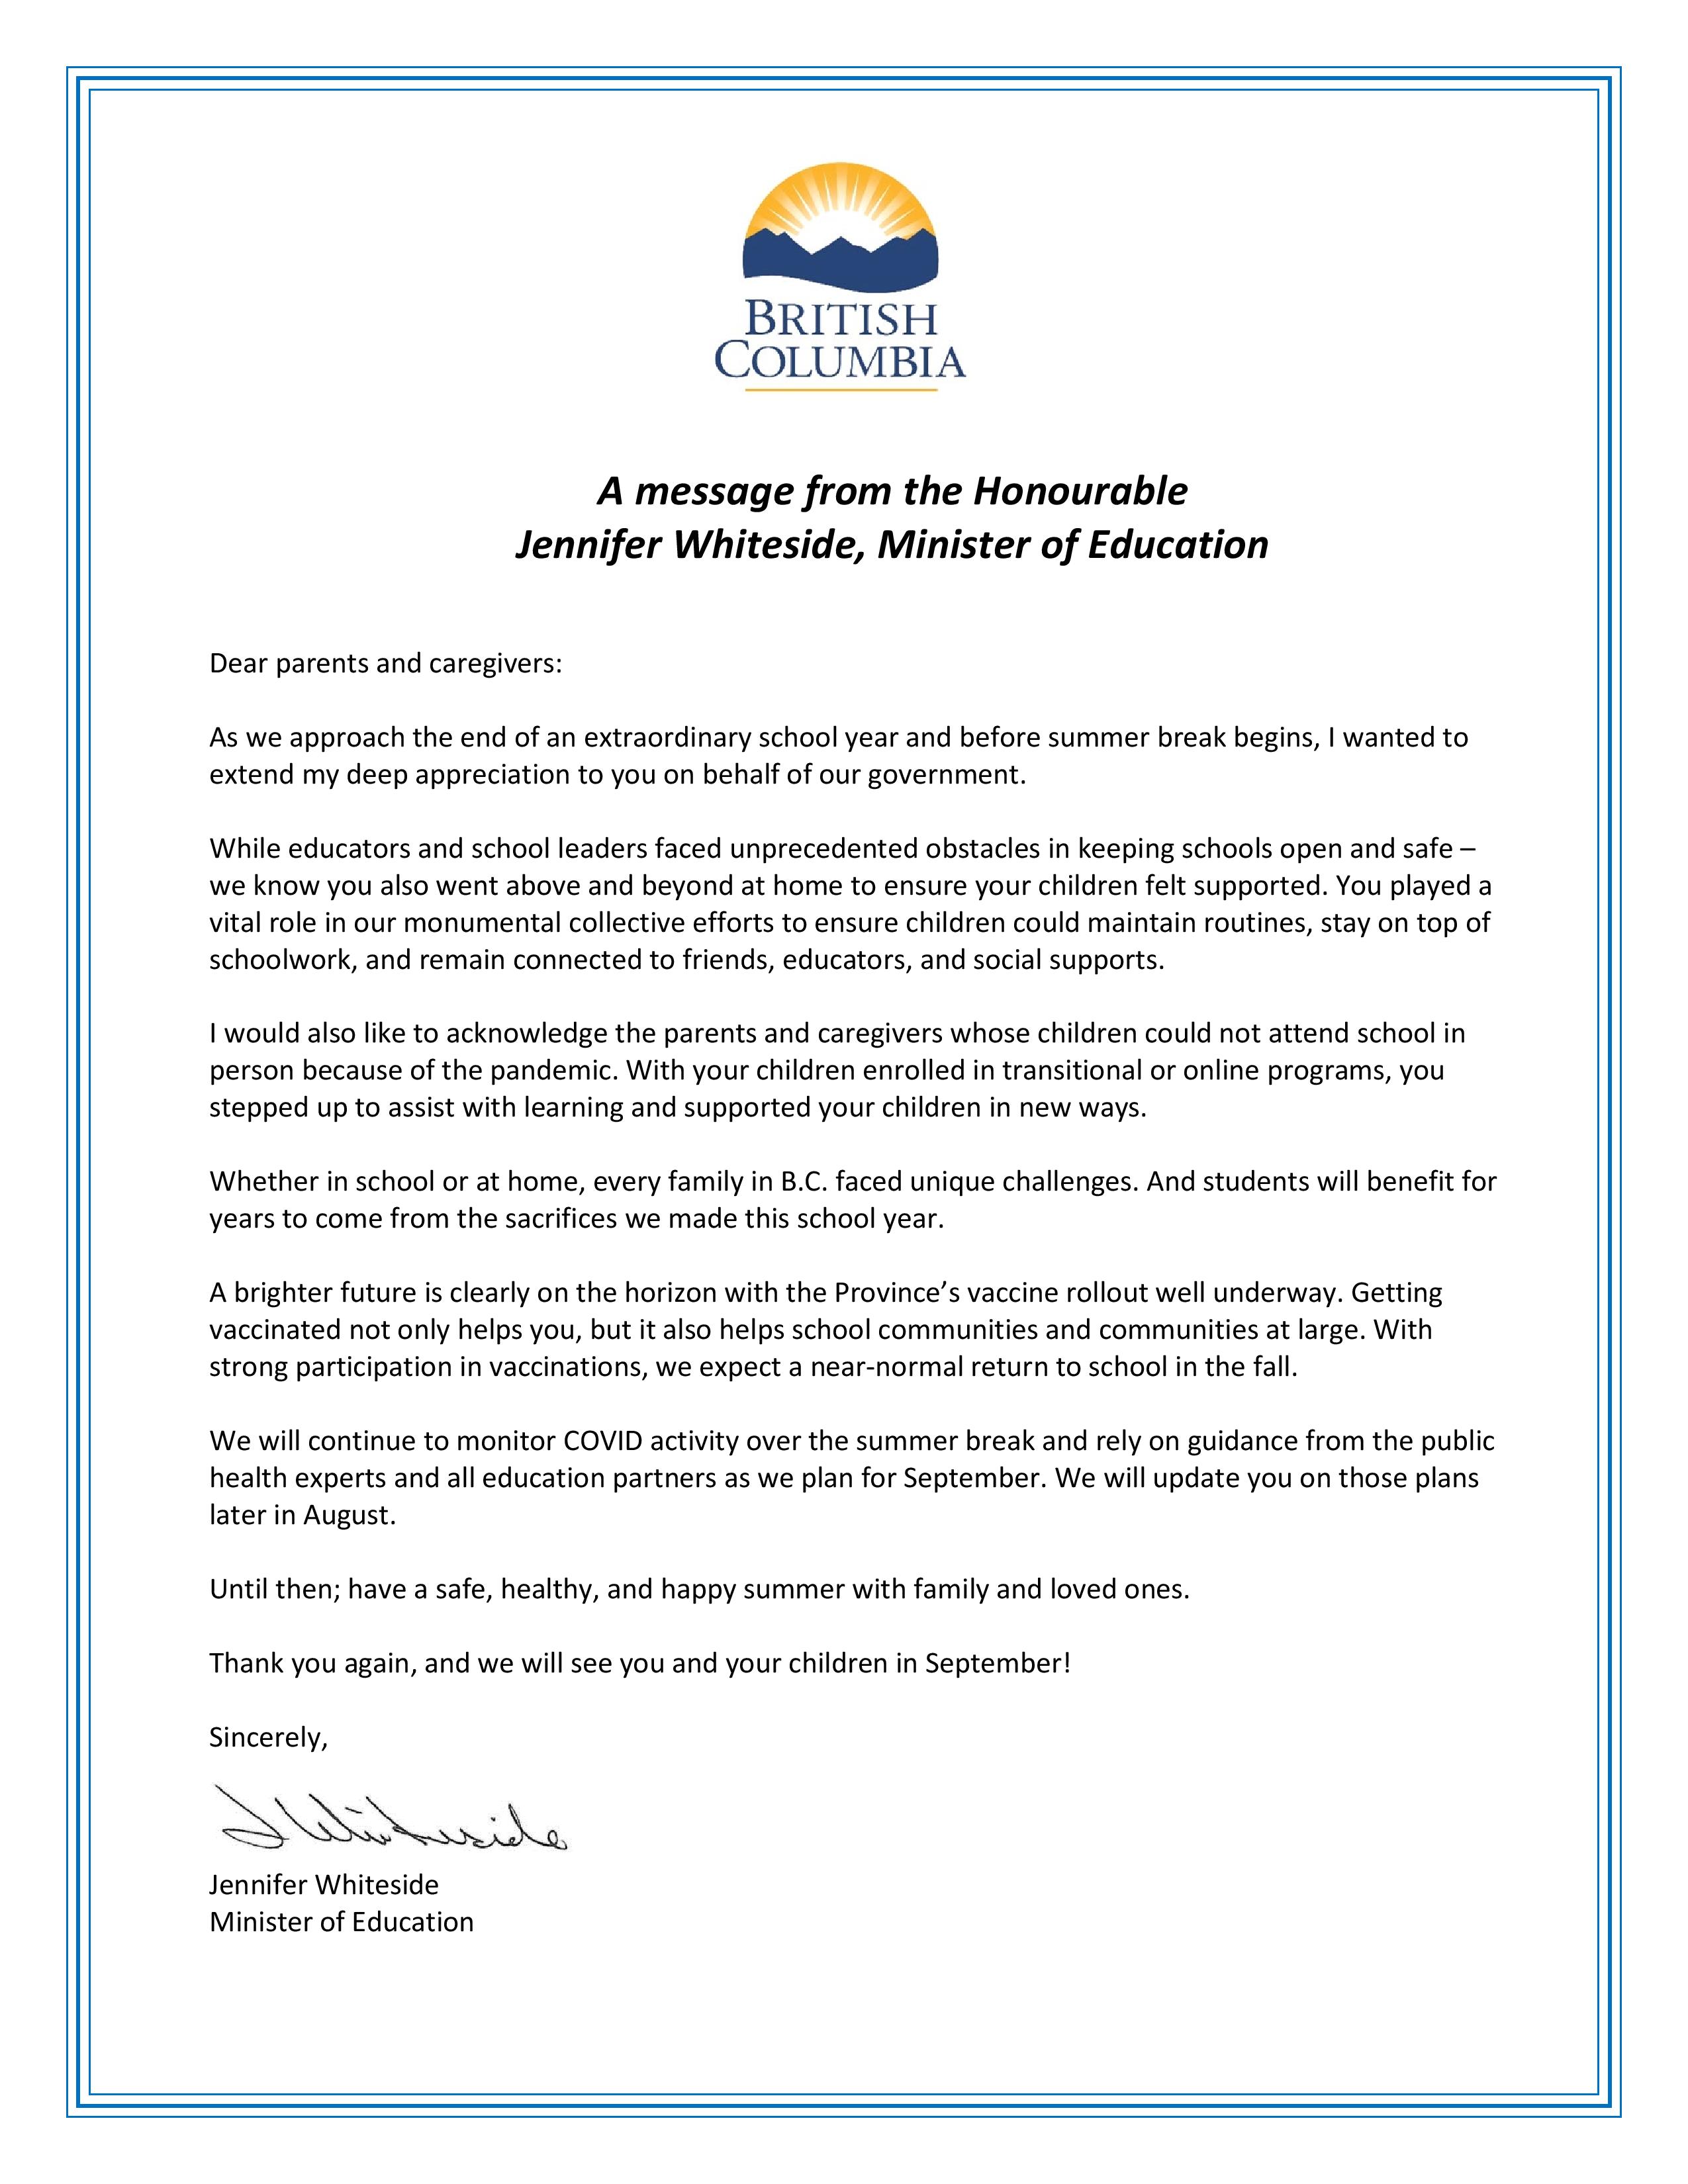 Letter to parents and caregivers from the BC Ministry of Educastion